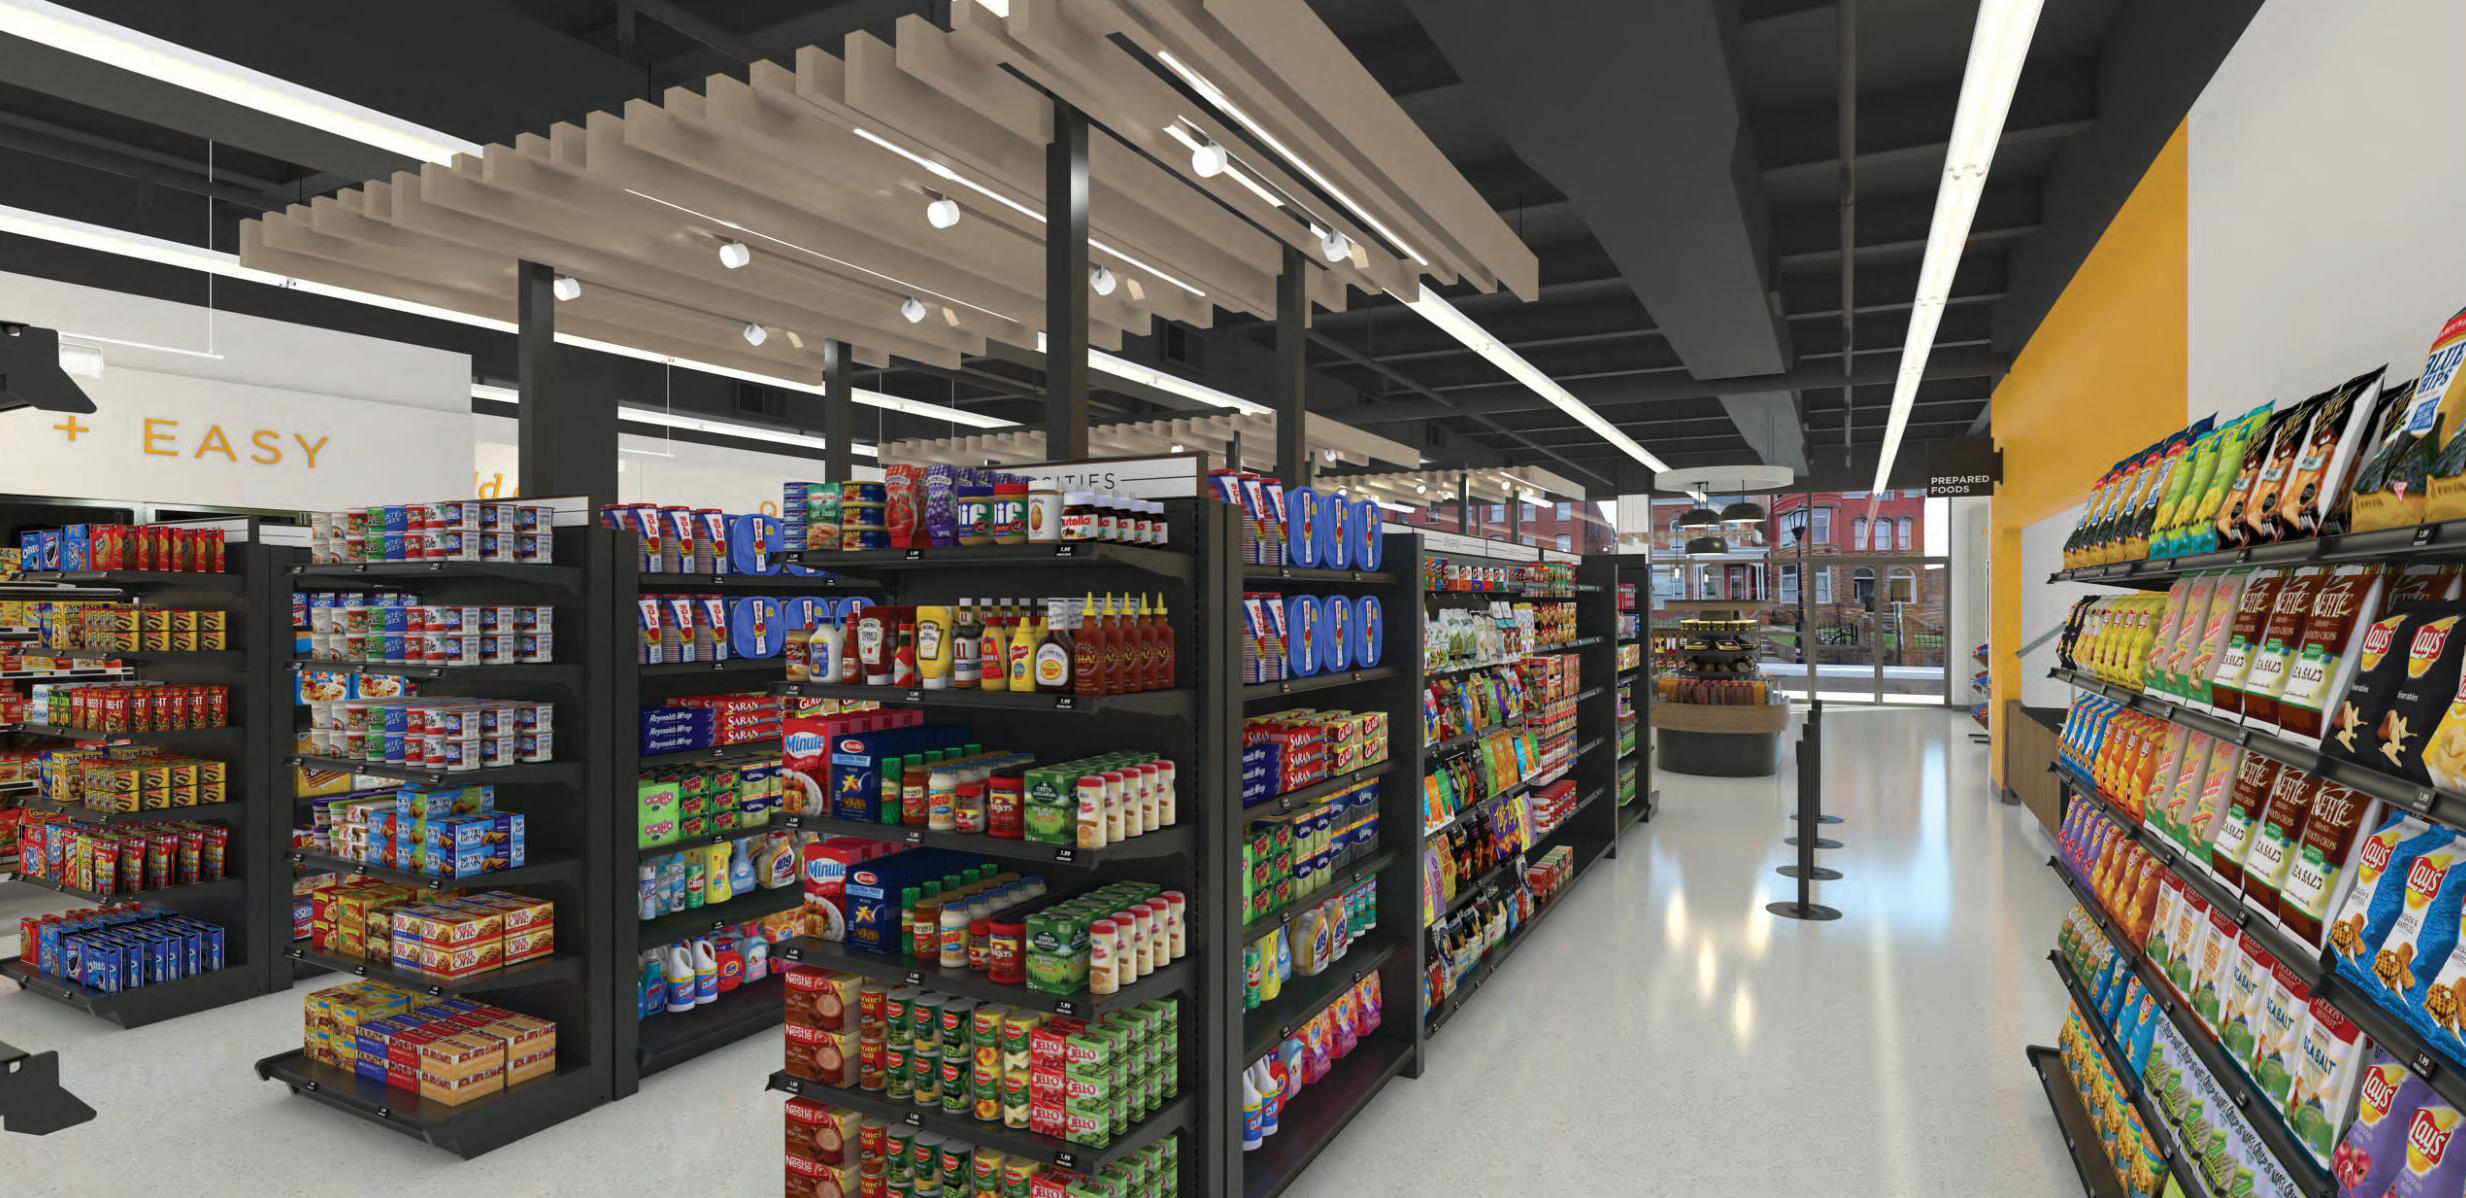 Digital rendering of a small grocery market, with shelves stocked with goods